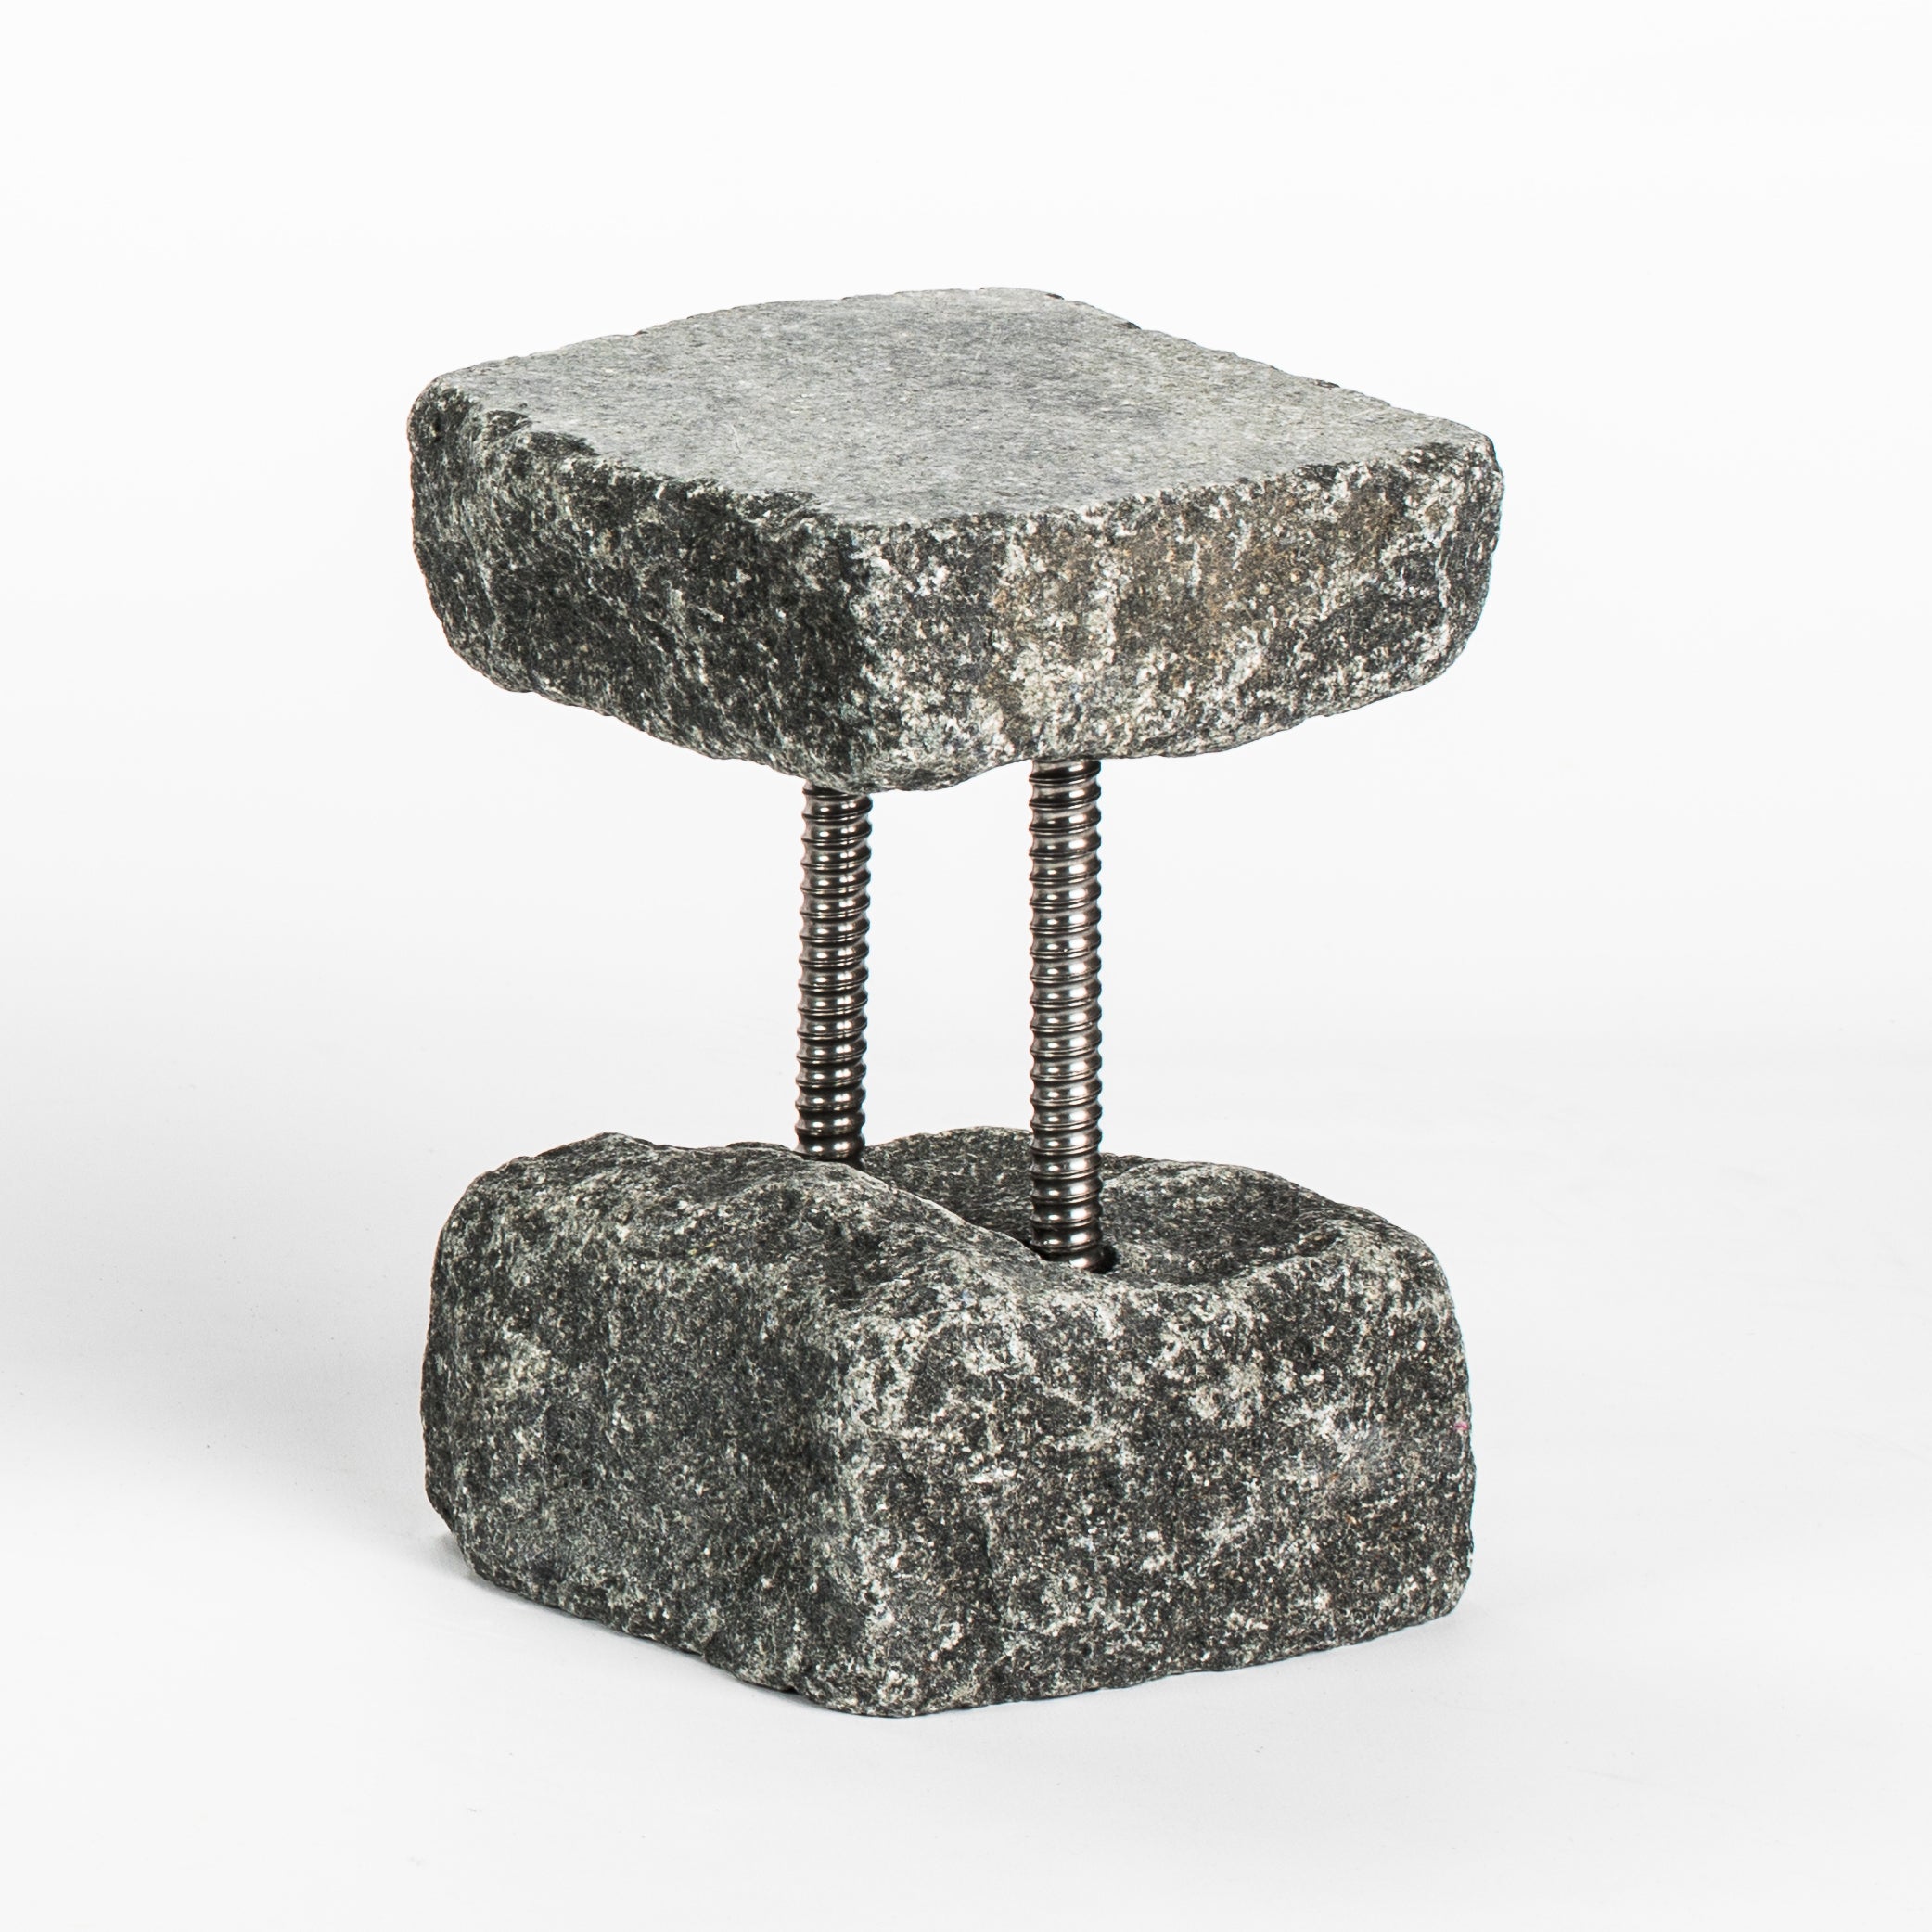 New Tall Stand - Funky Rock Designs